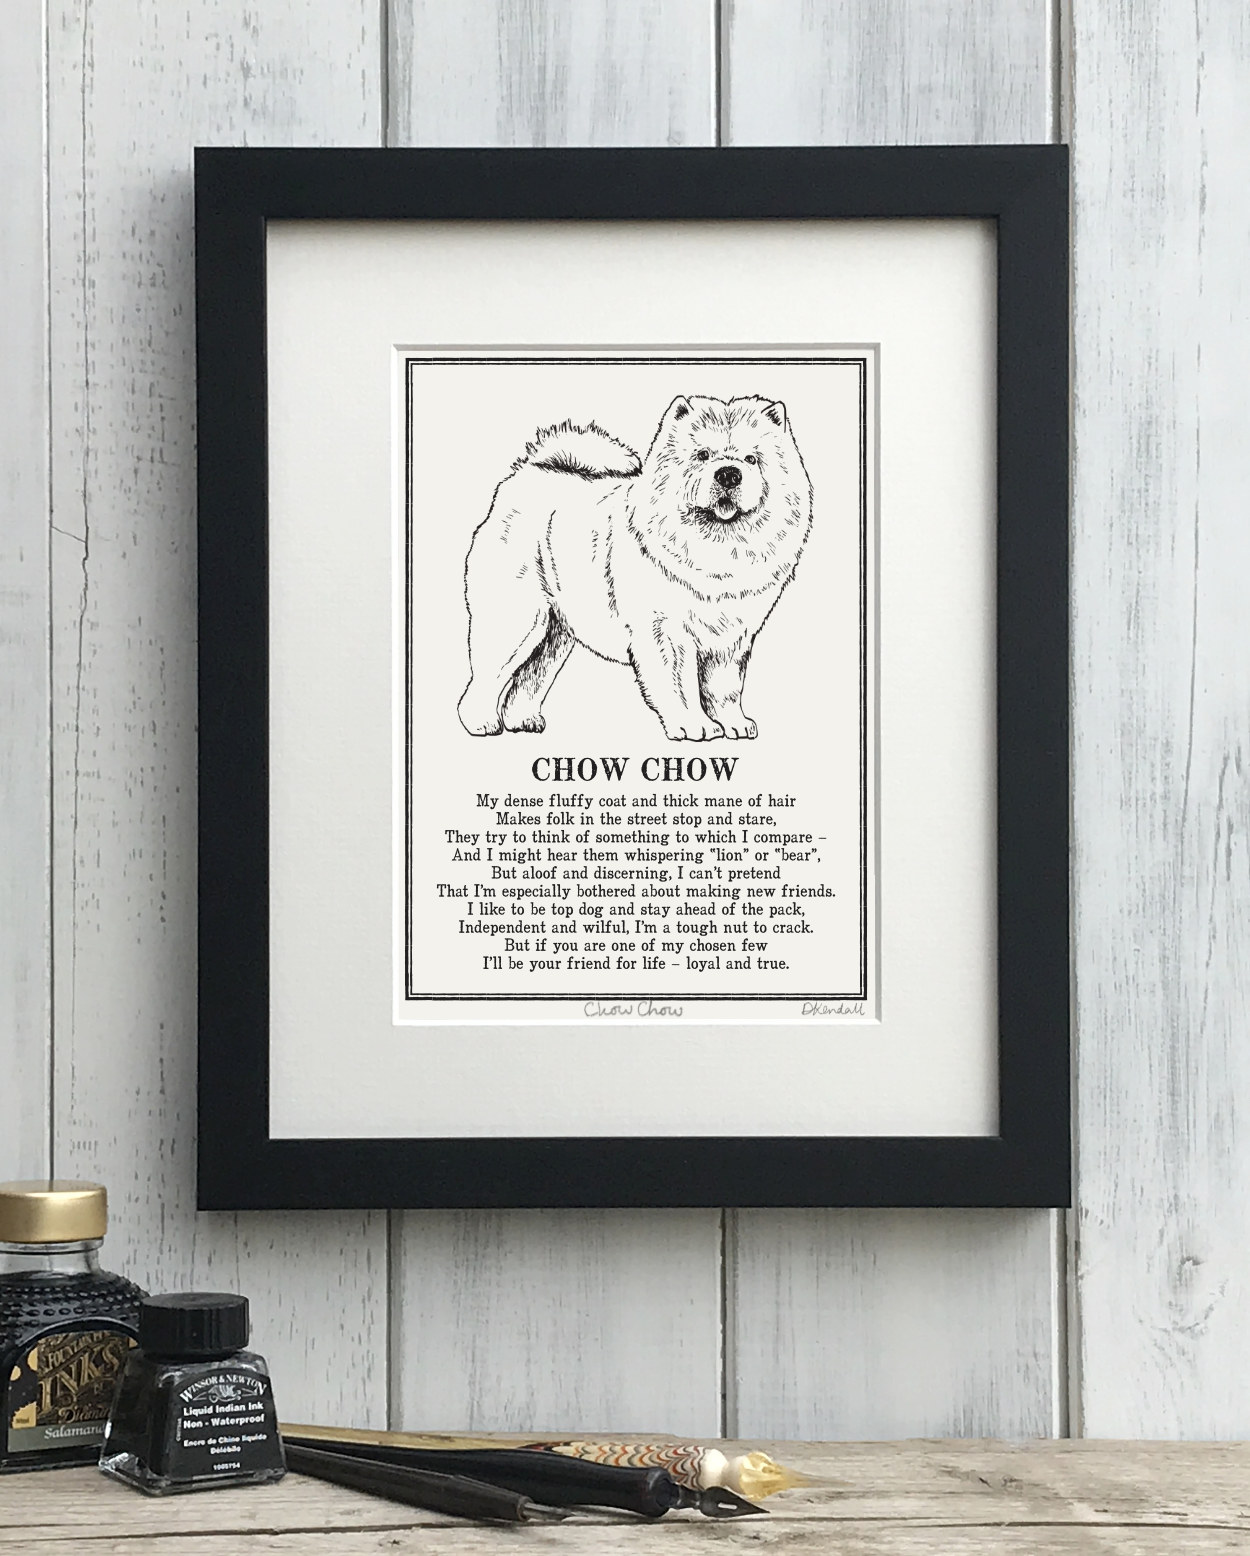 Chow Chow Doggerel Illustrated Poem Art Print | The Enlightened Hound